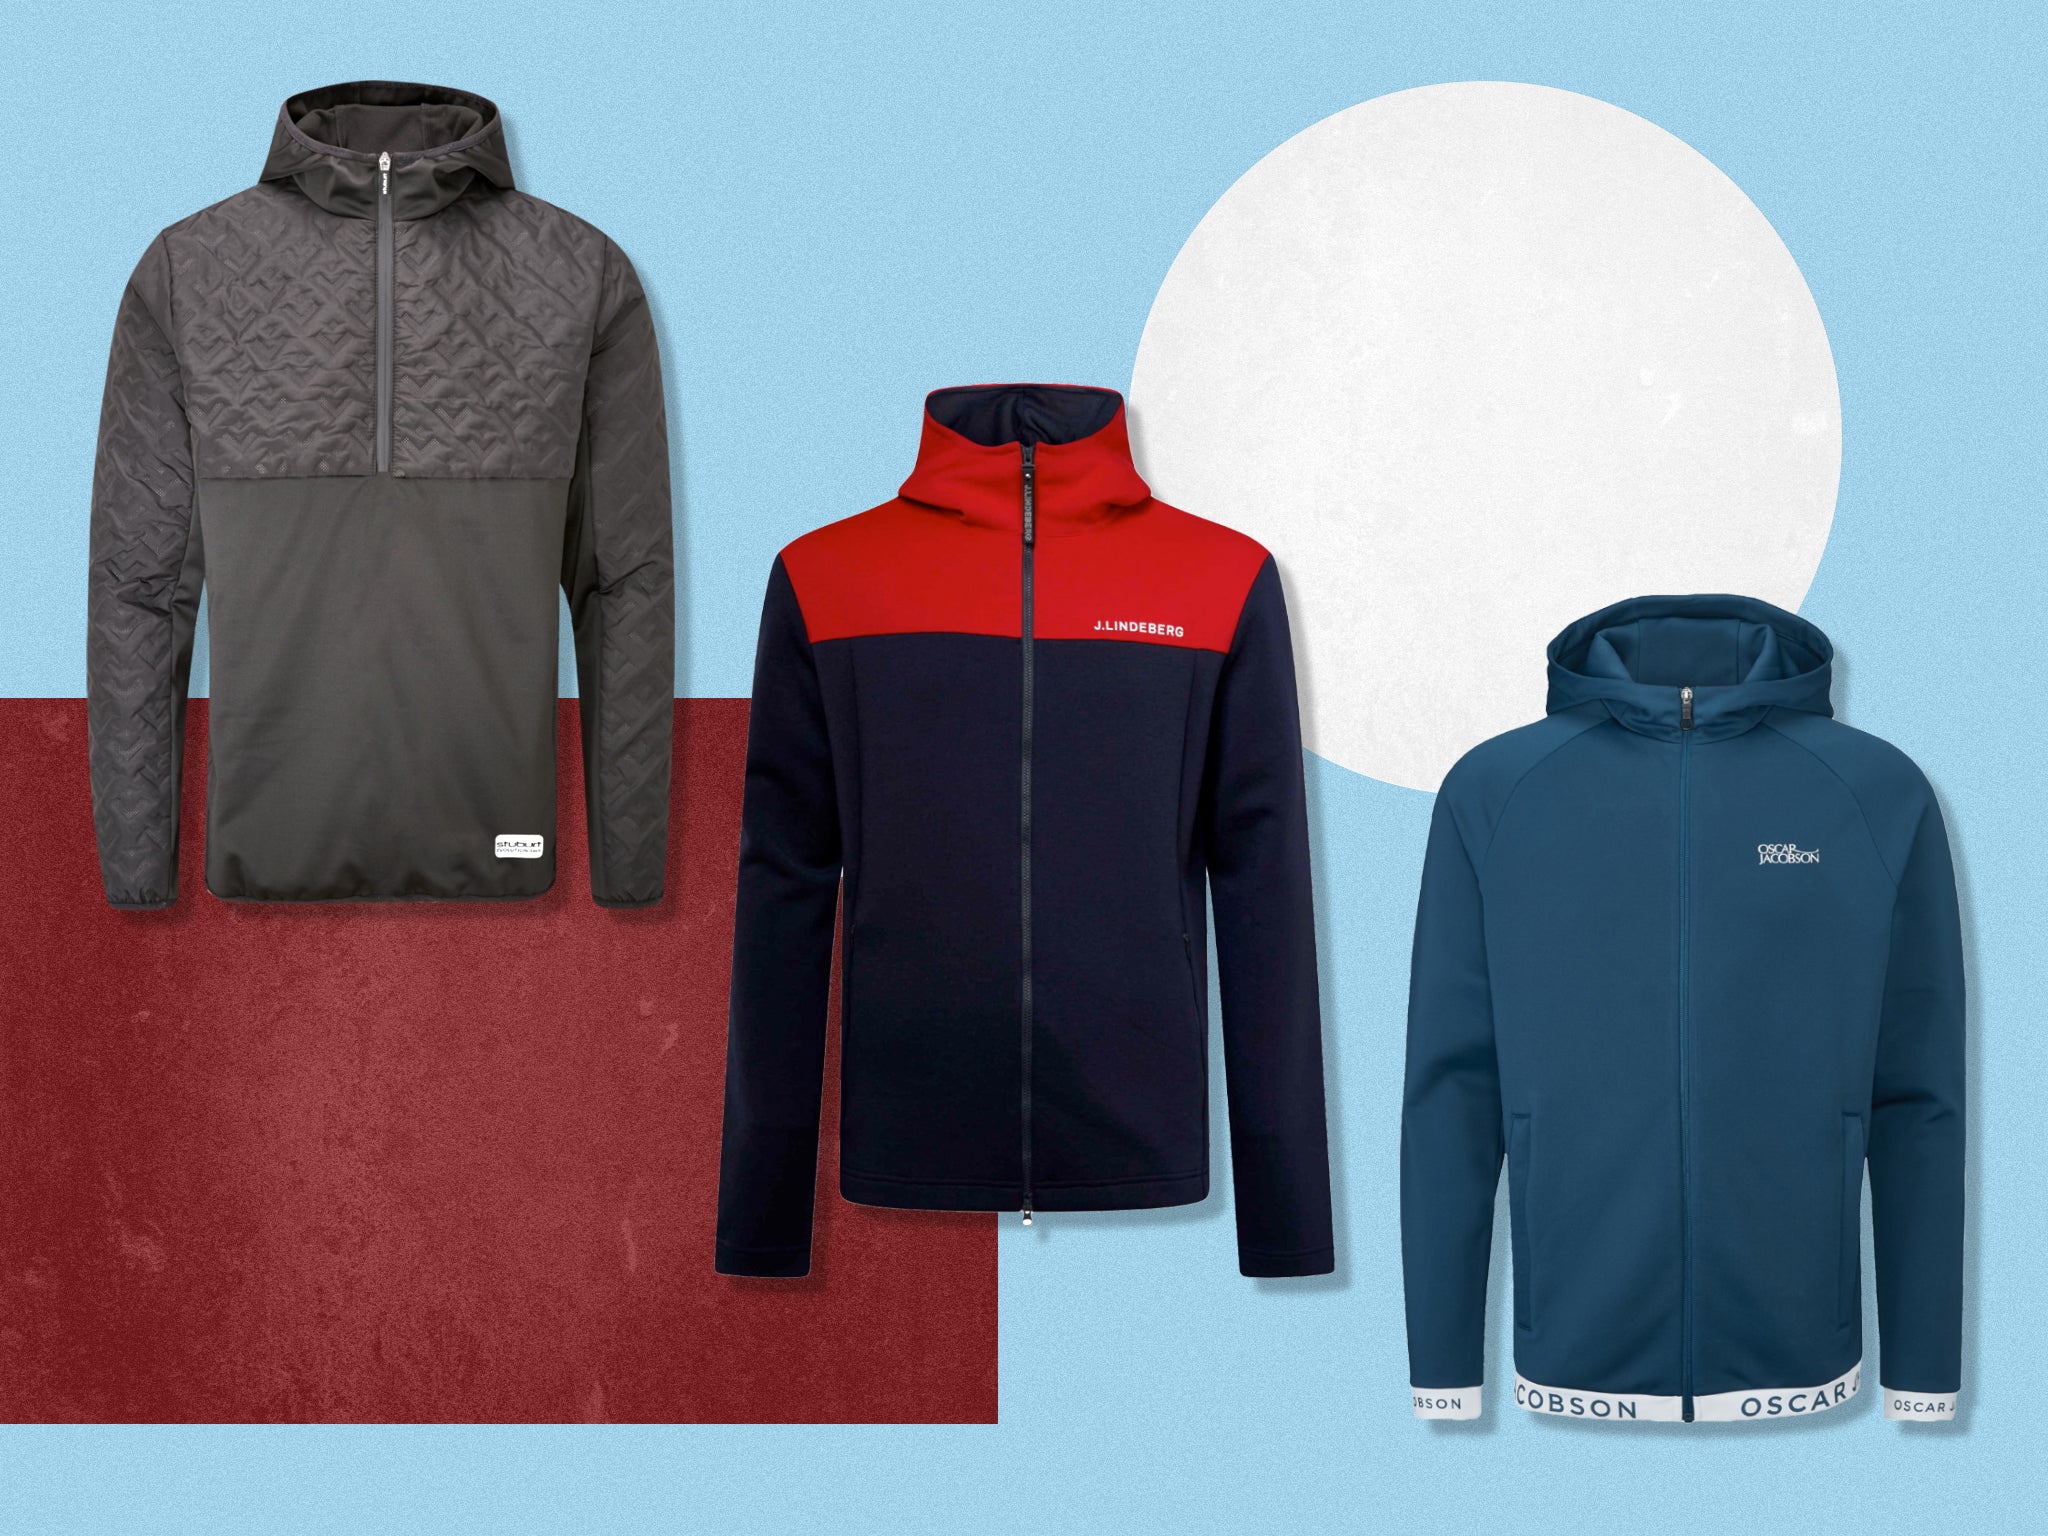 Best golf hoodies 2022: Men's gilets, sweaters and jackets | The